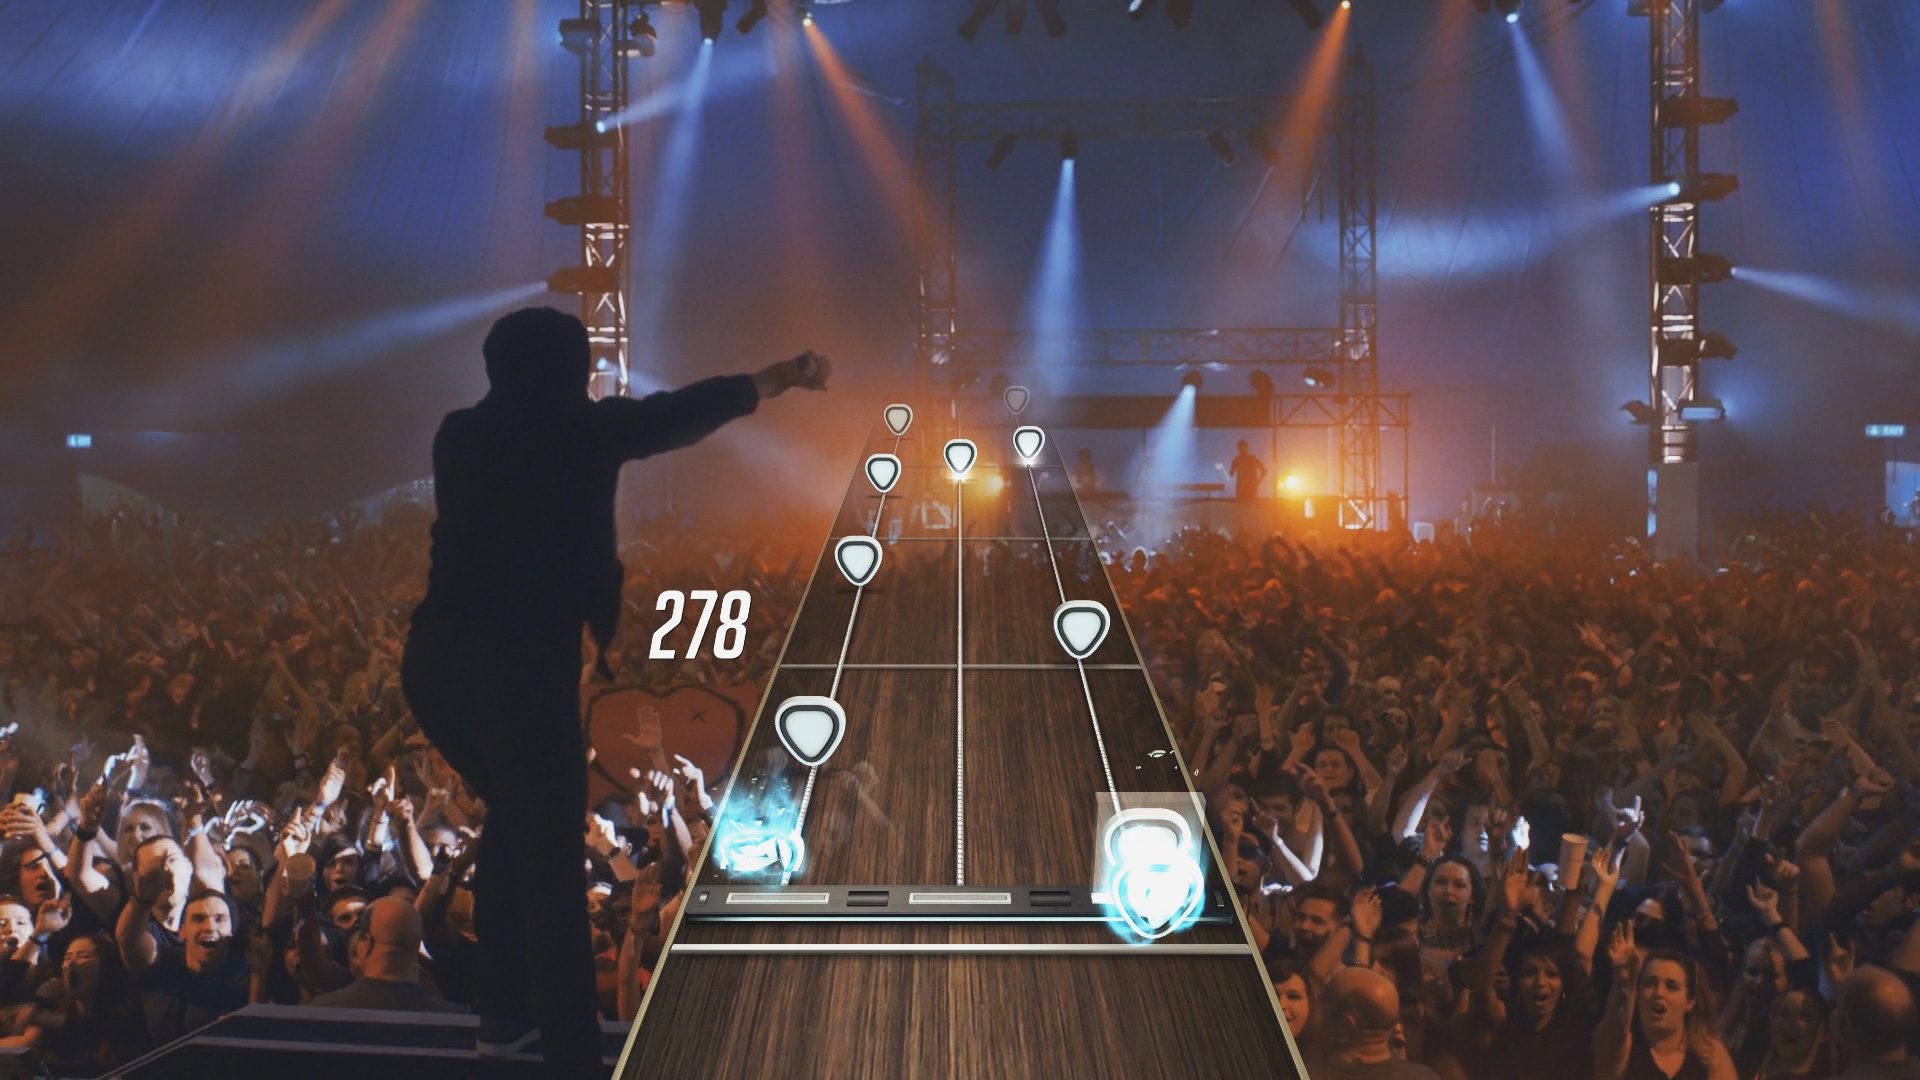 If you bought Guitar Hero Live last year you are entitled to a full refund